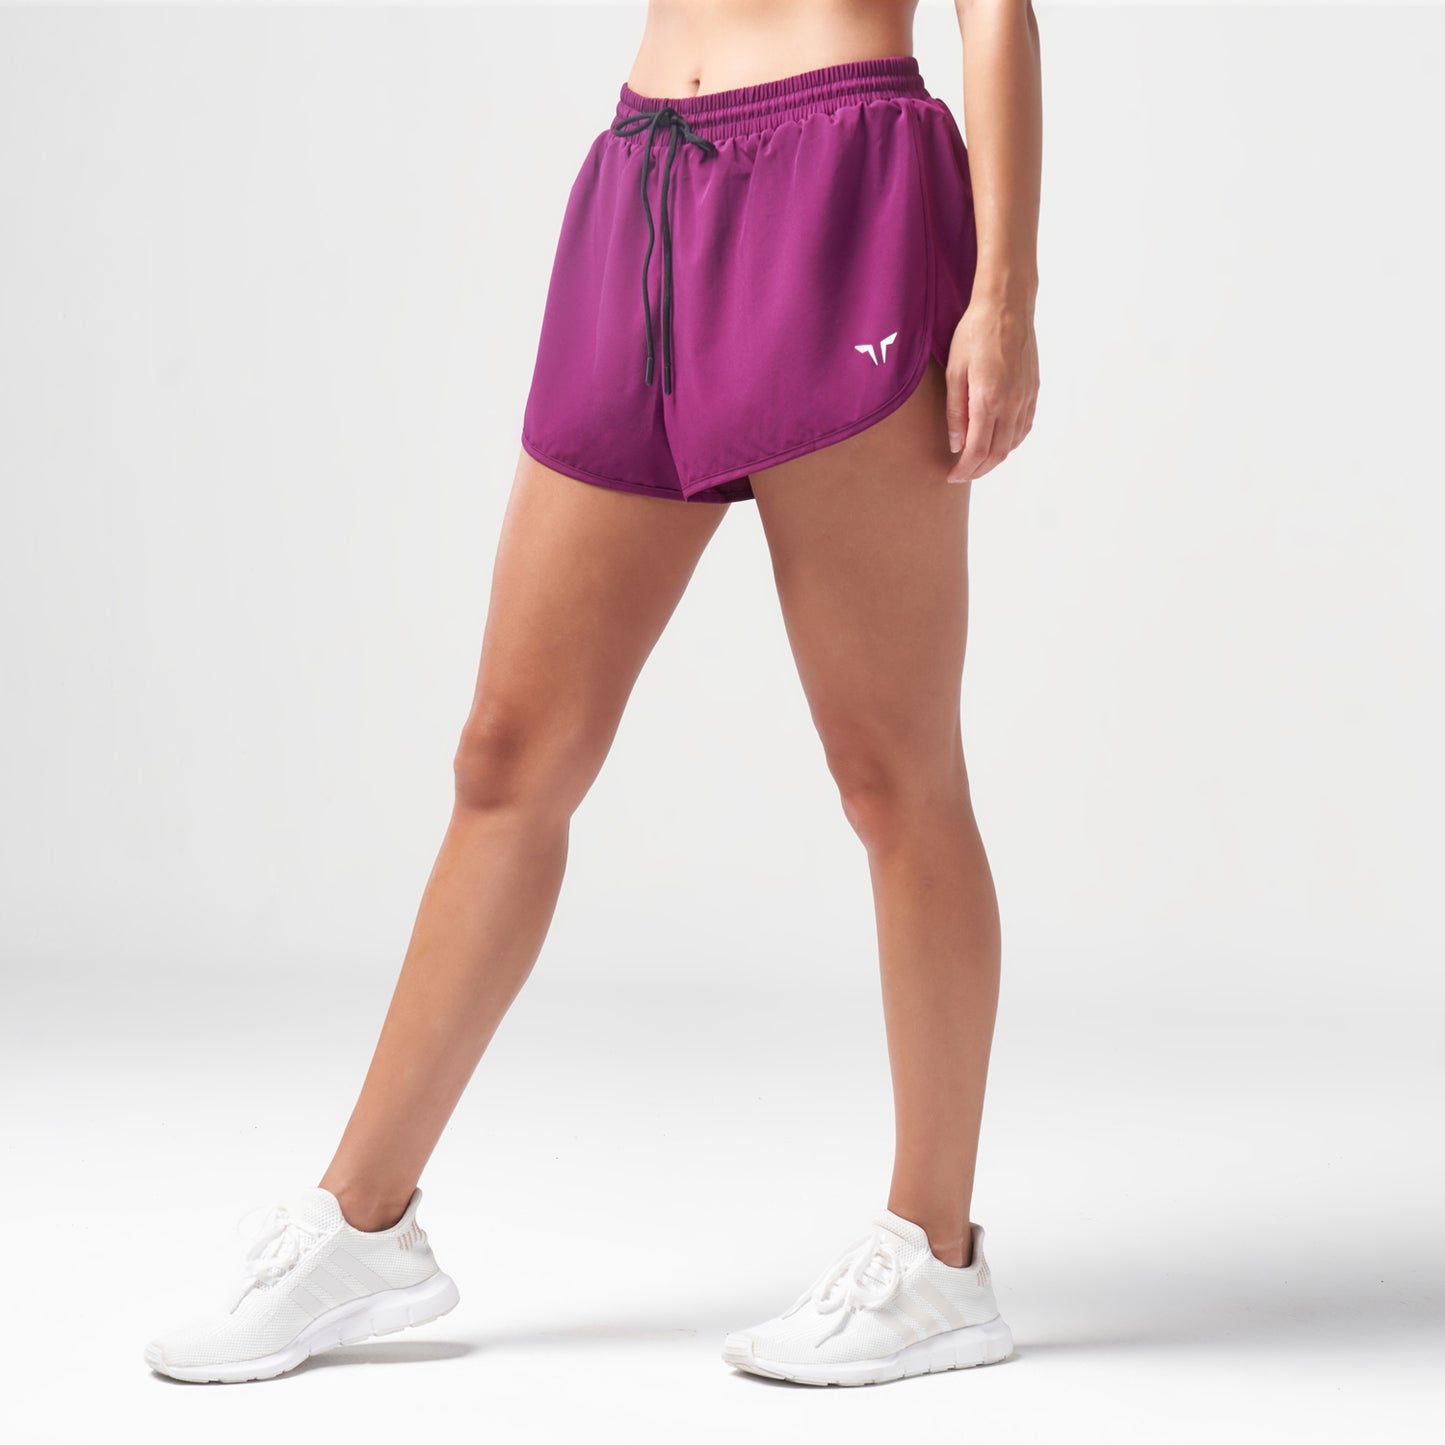 squatwolf-workout-clothes-essential-running-shorts-purple-running-shorts-for-women